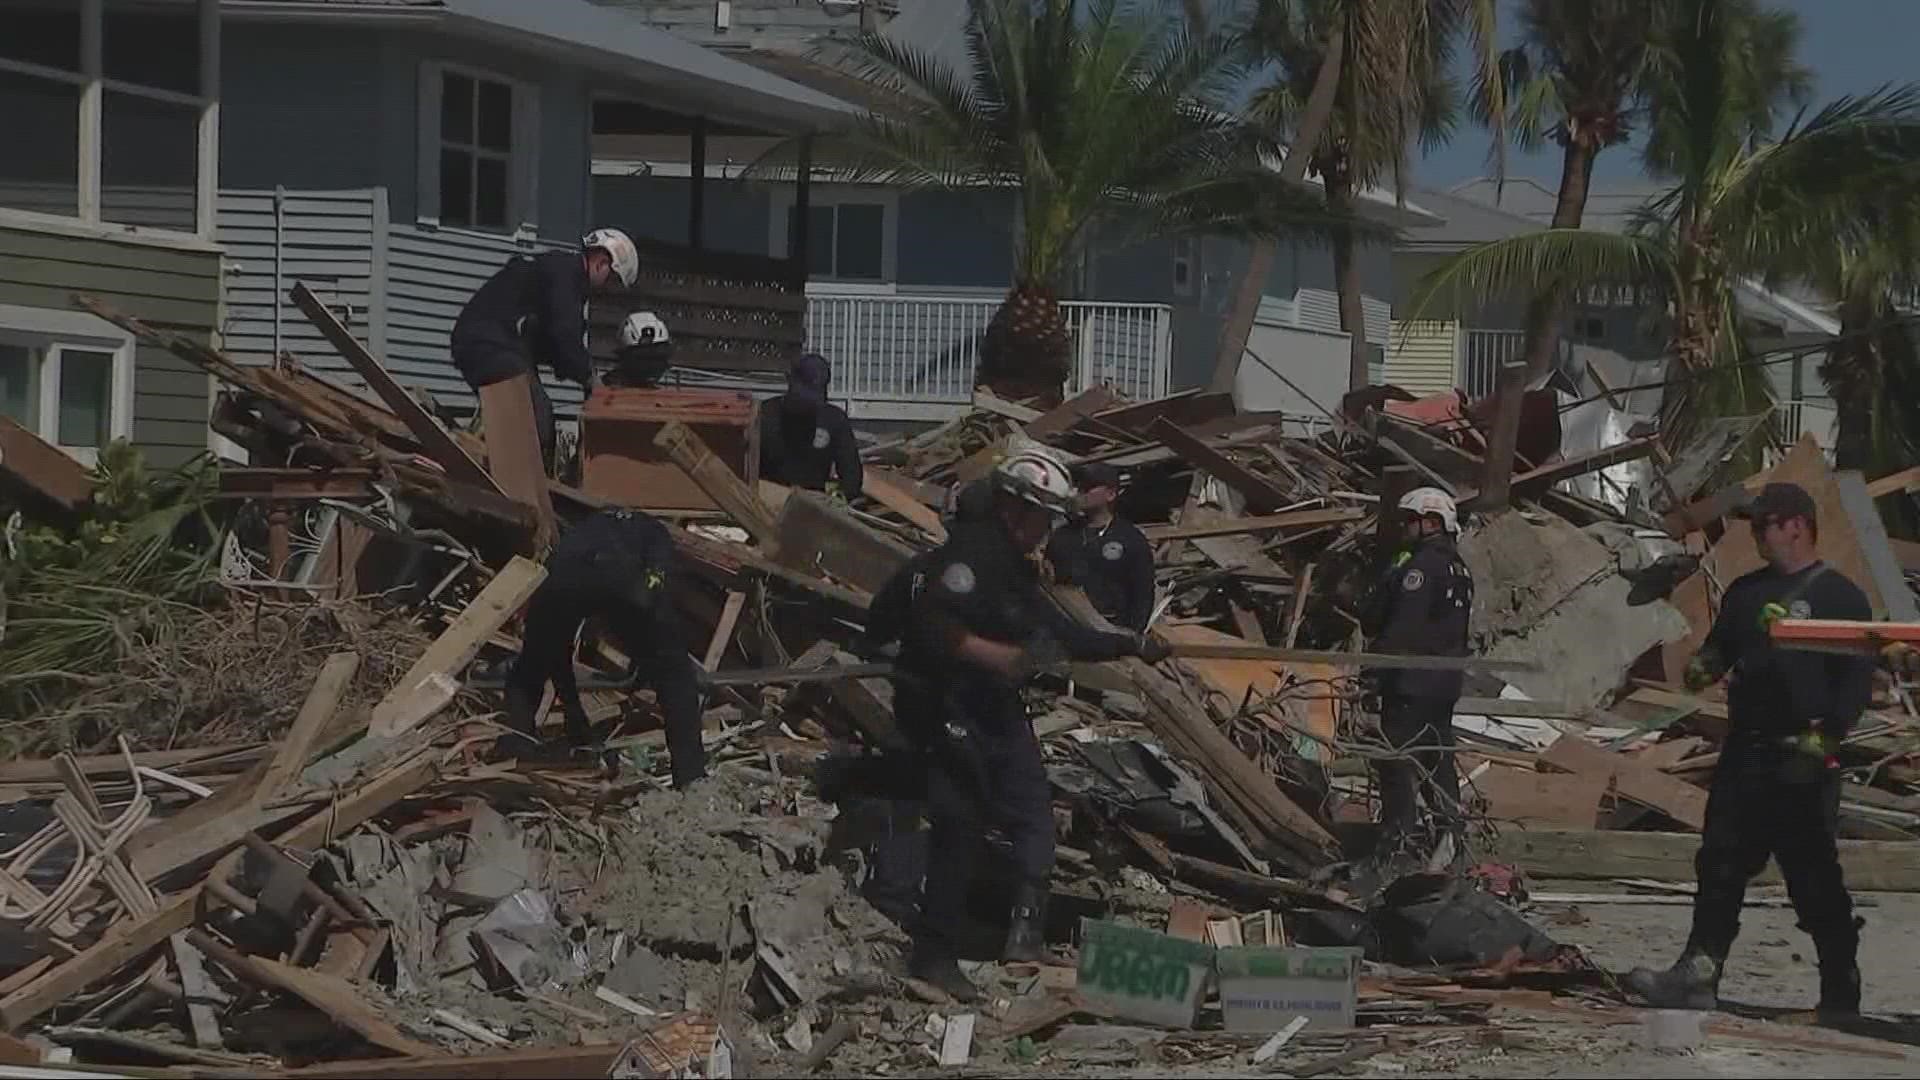 Here's the latest on search and rescue operations happening in Florida after Hurricane Ian.